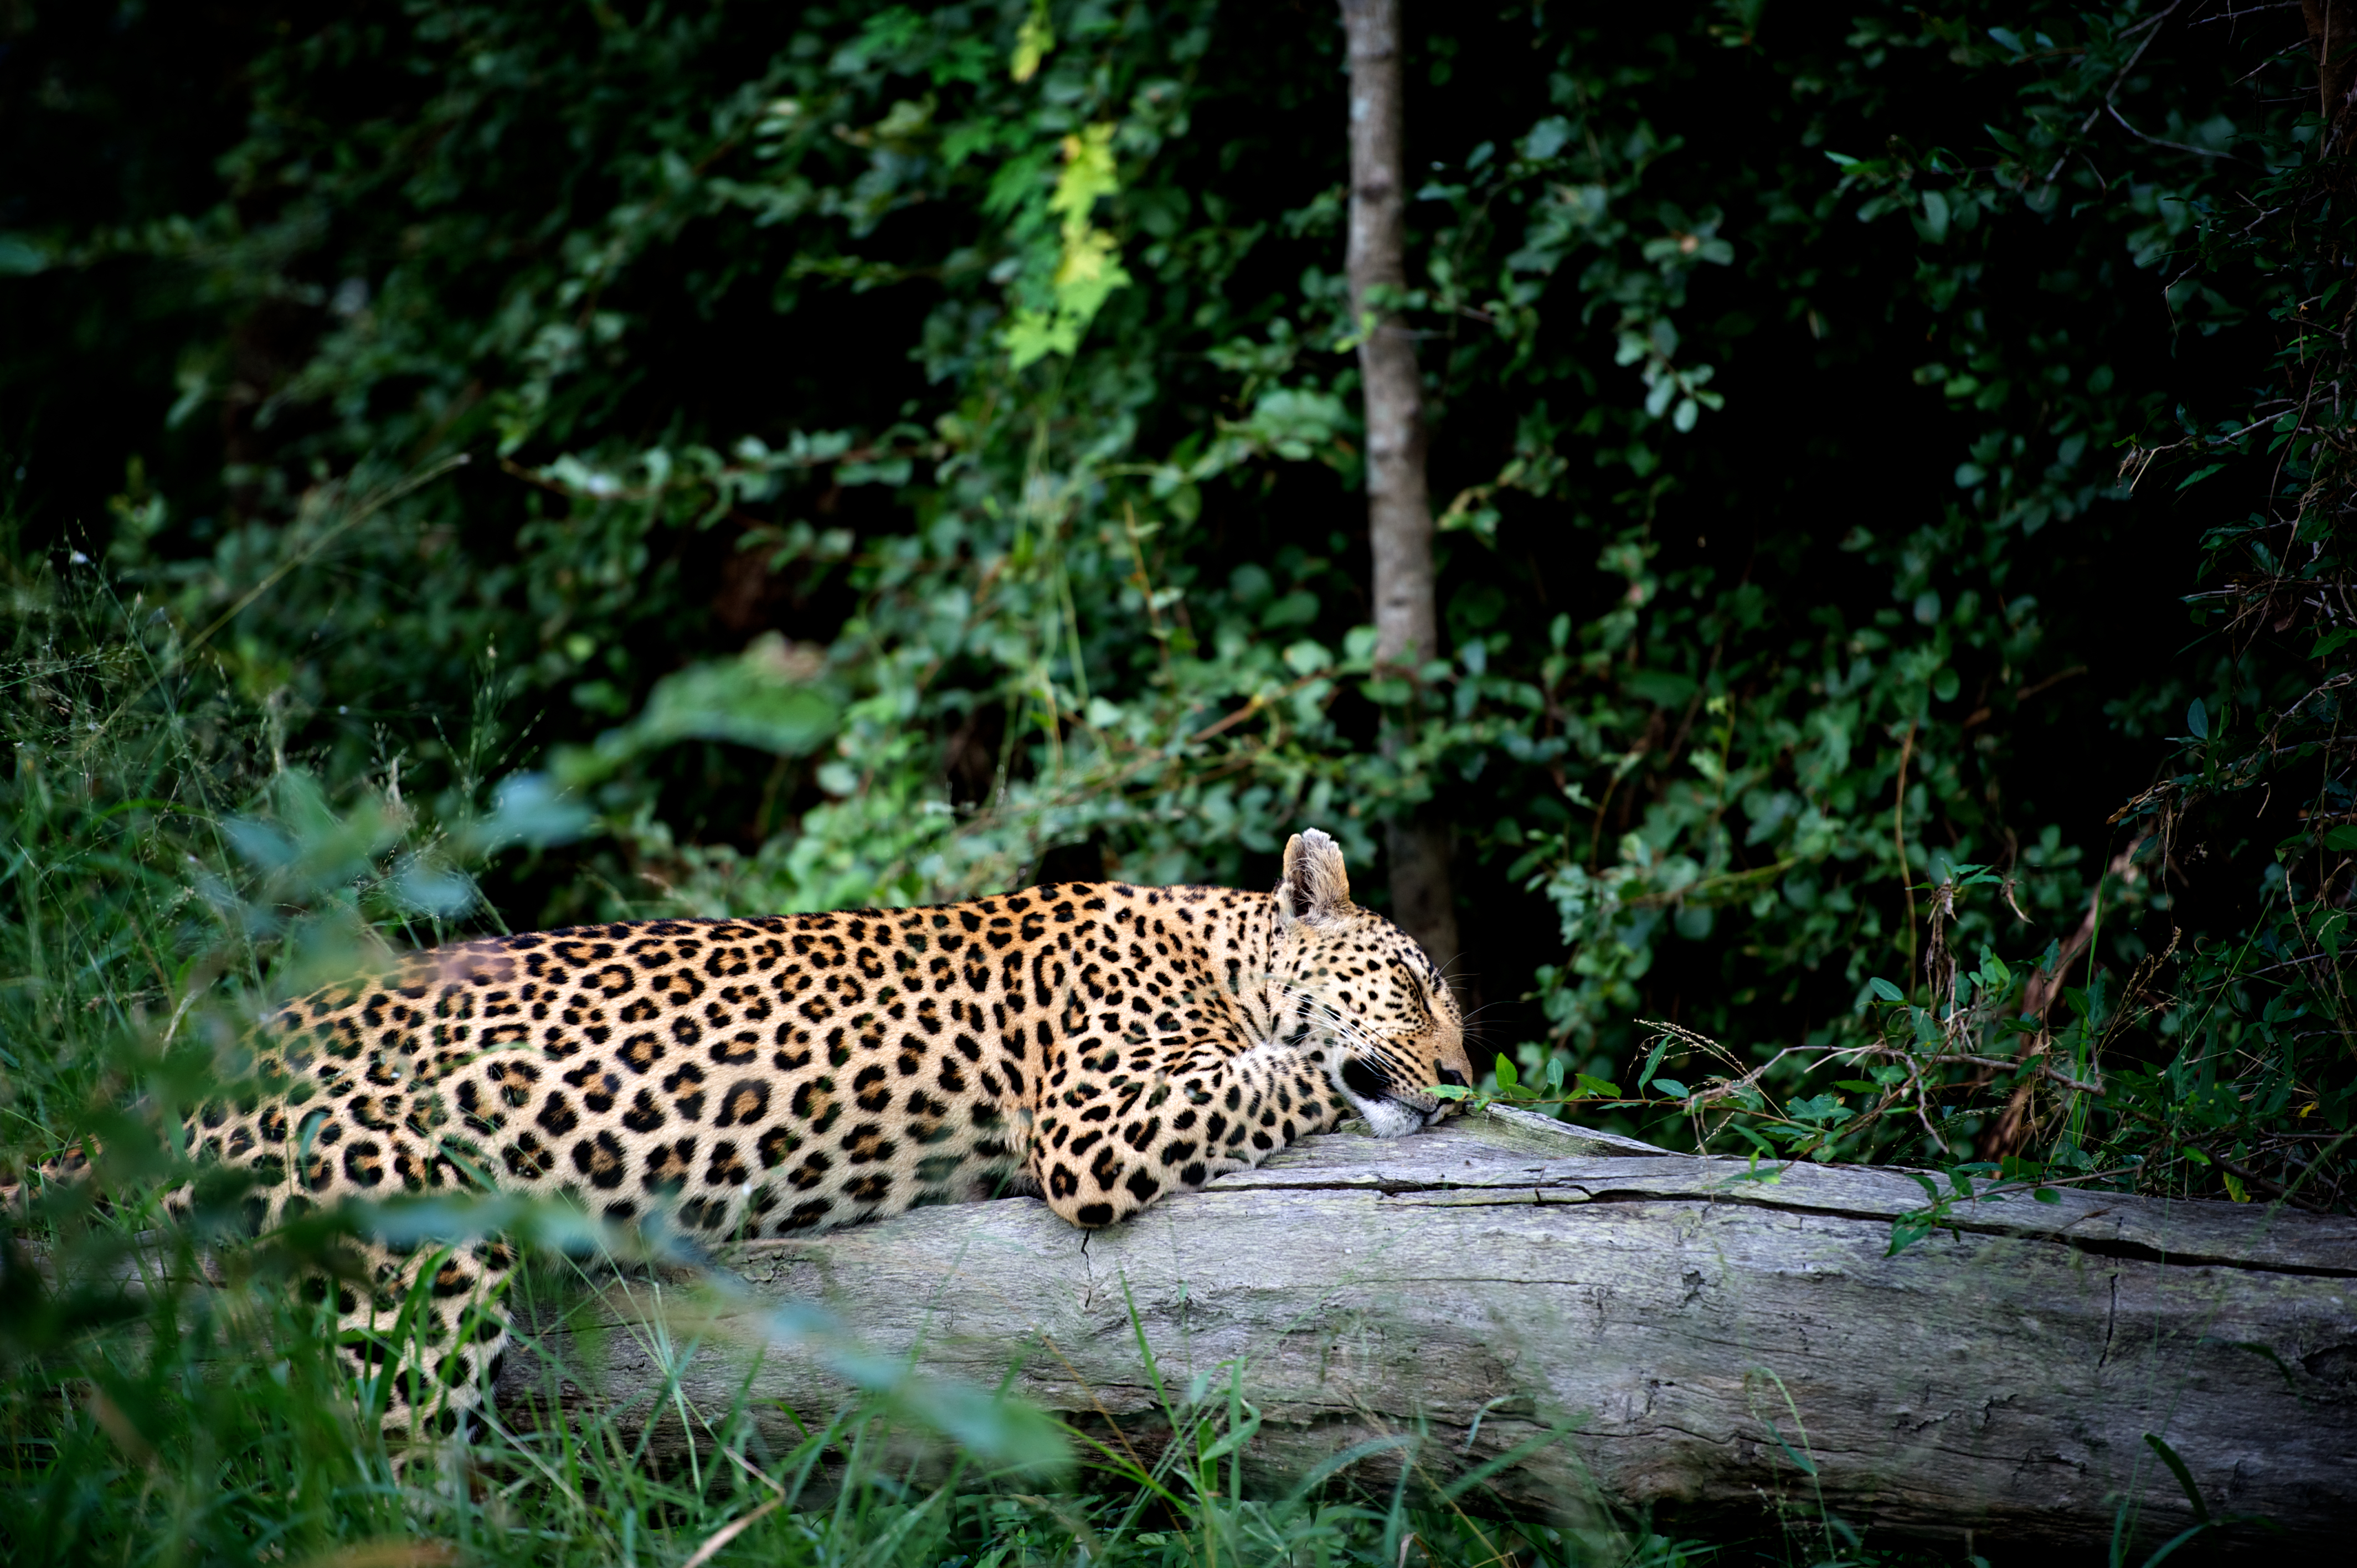 Leopard Napping, Sabi Sand Reserve, South Africa